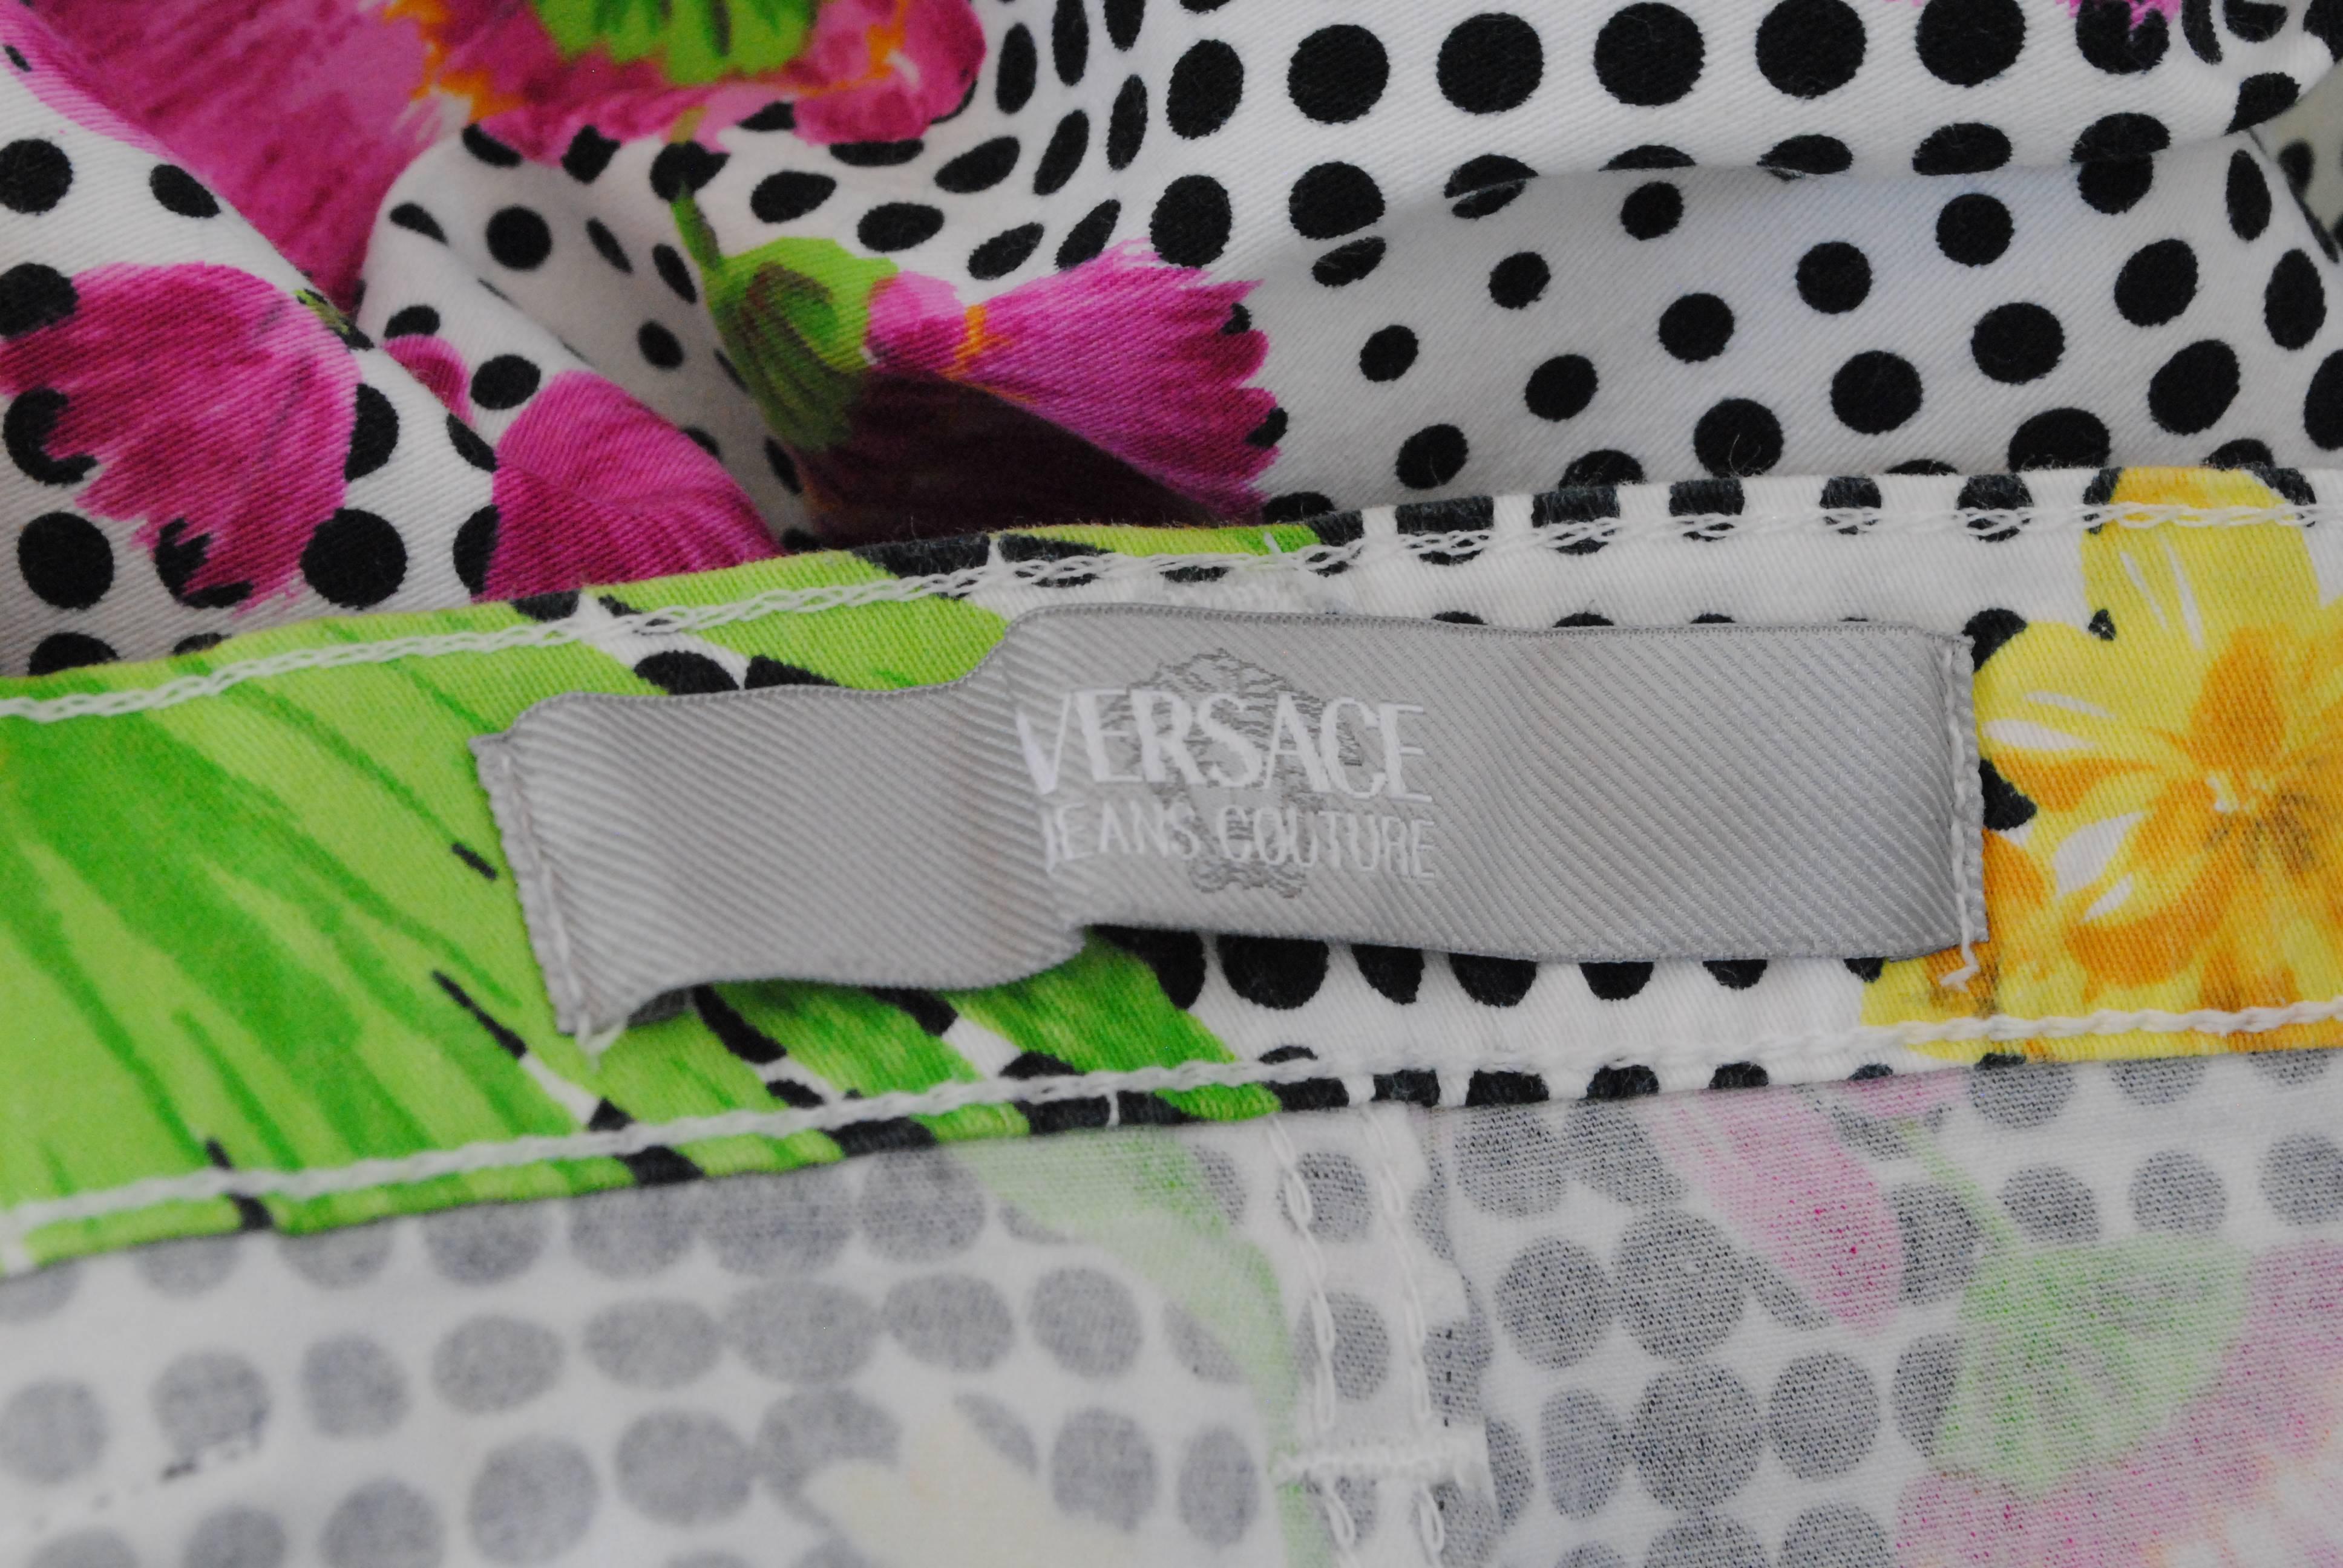 Versace Jeans couture Black and white flower jeans 2